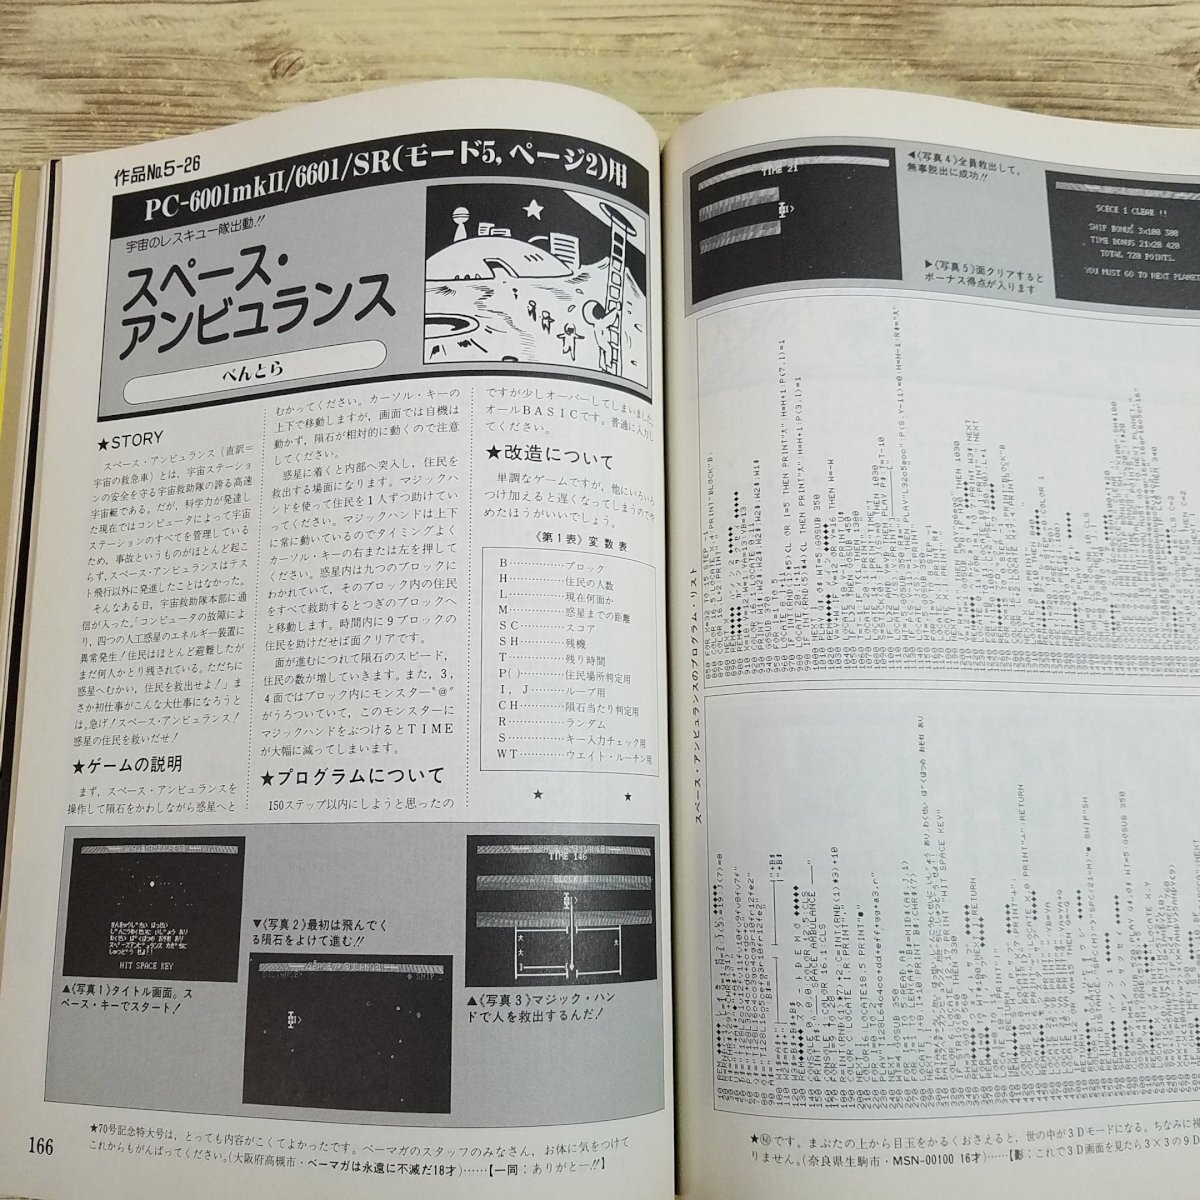  personal computer magazine [ microcomputer BASIC magazine 1988 year 5 month number ] program list 43ps.@ game music program 5ps.@PC game retro PC[ postage 180 jpy 